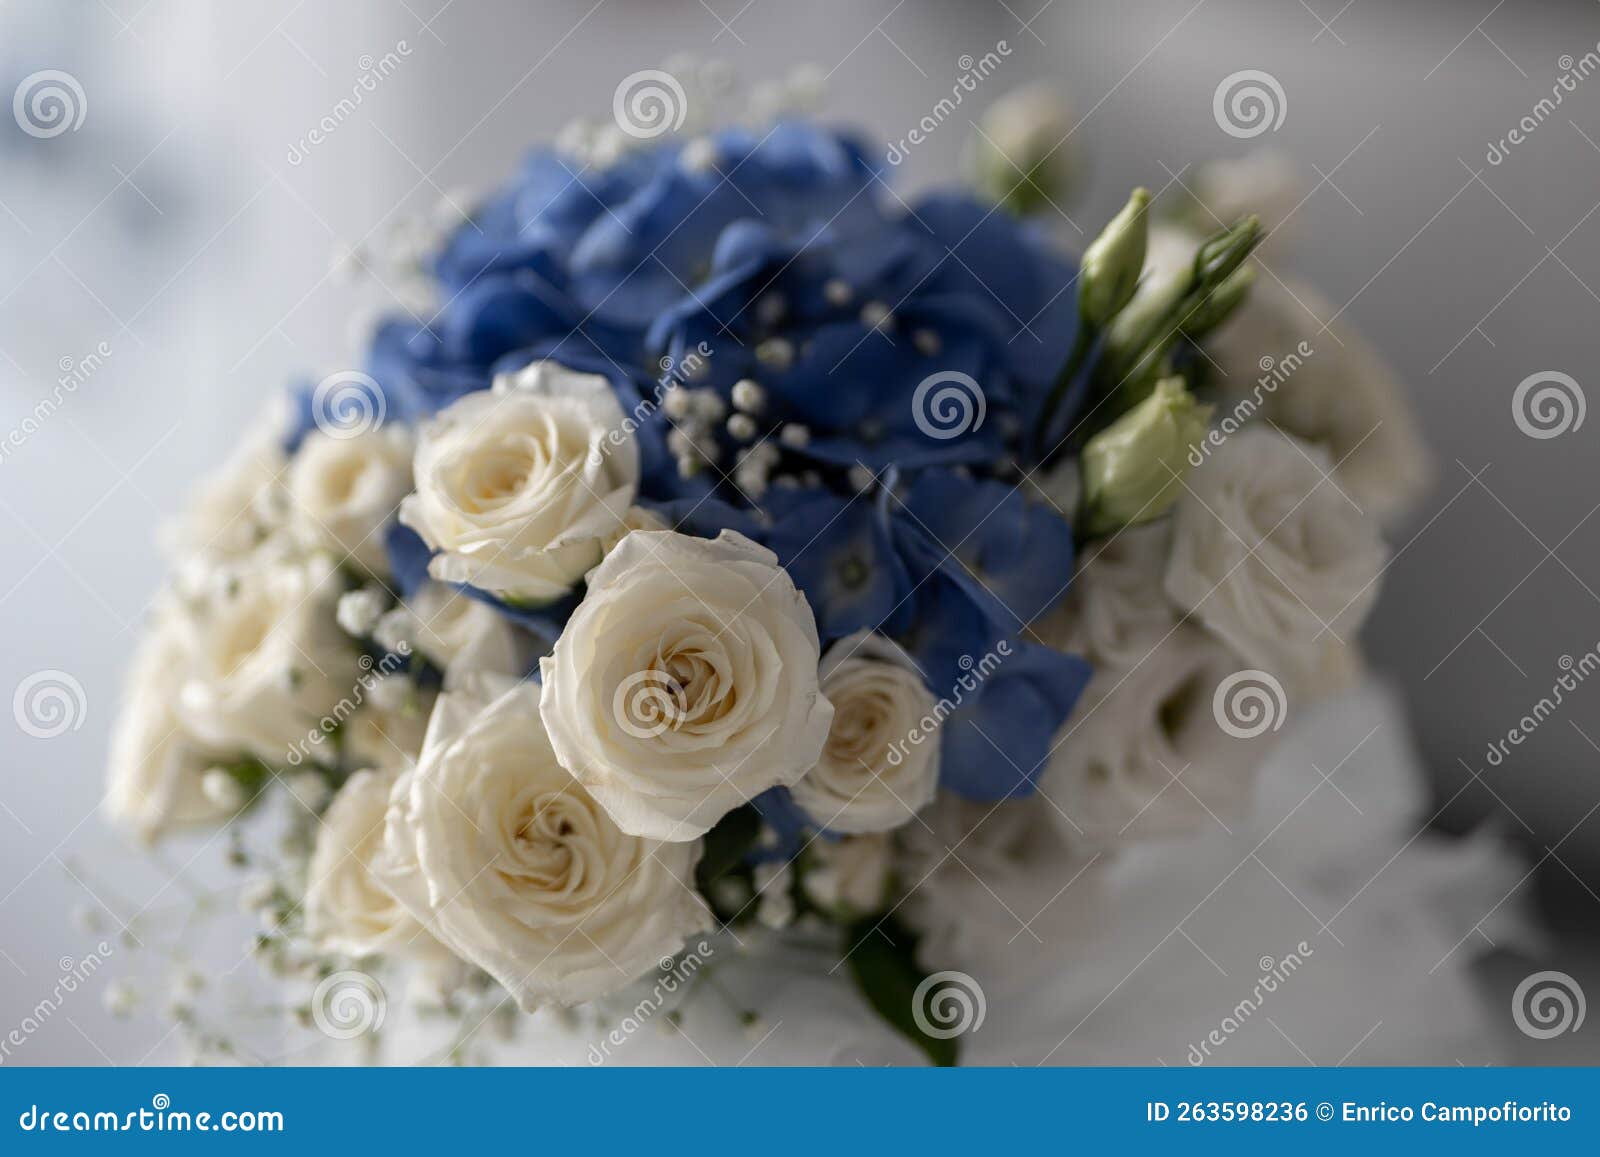 whites roses and blue orthensia wedding bouquet close-up